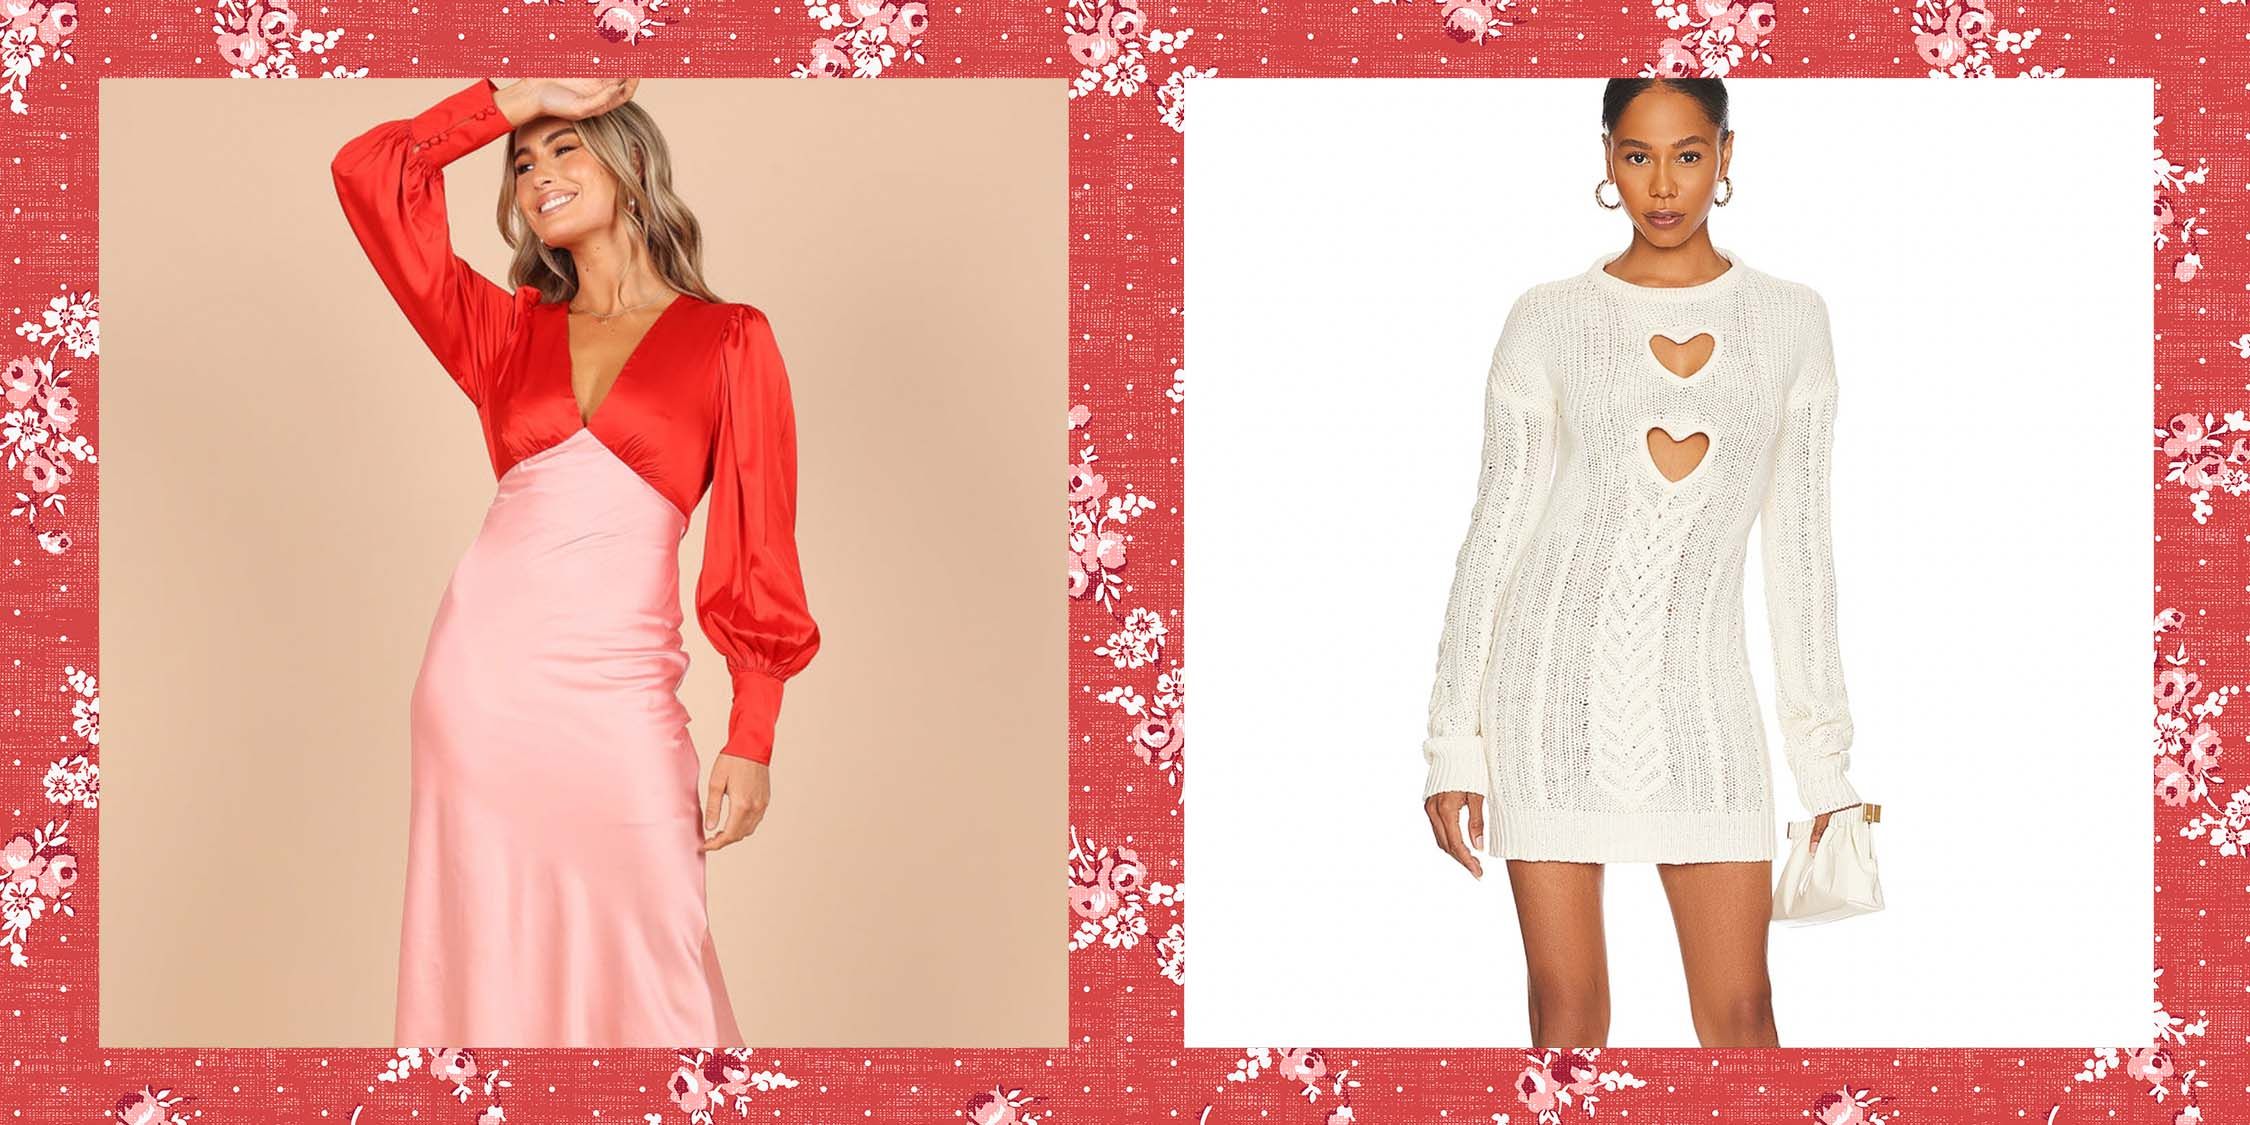 15 Cute Valentine's Day Dresses 2023 - What to Wear on Valentine's Day